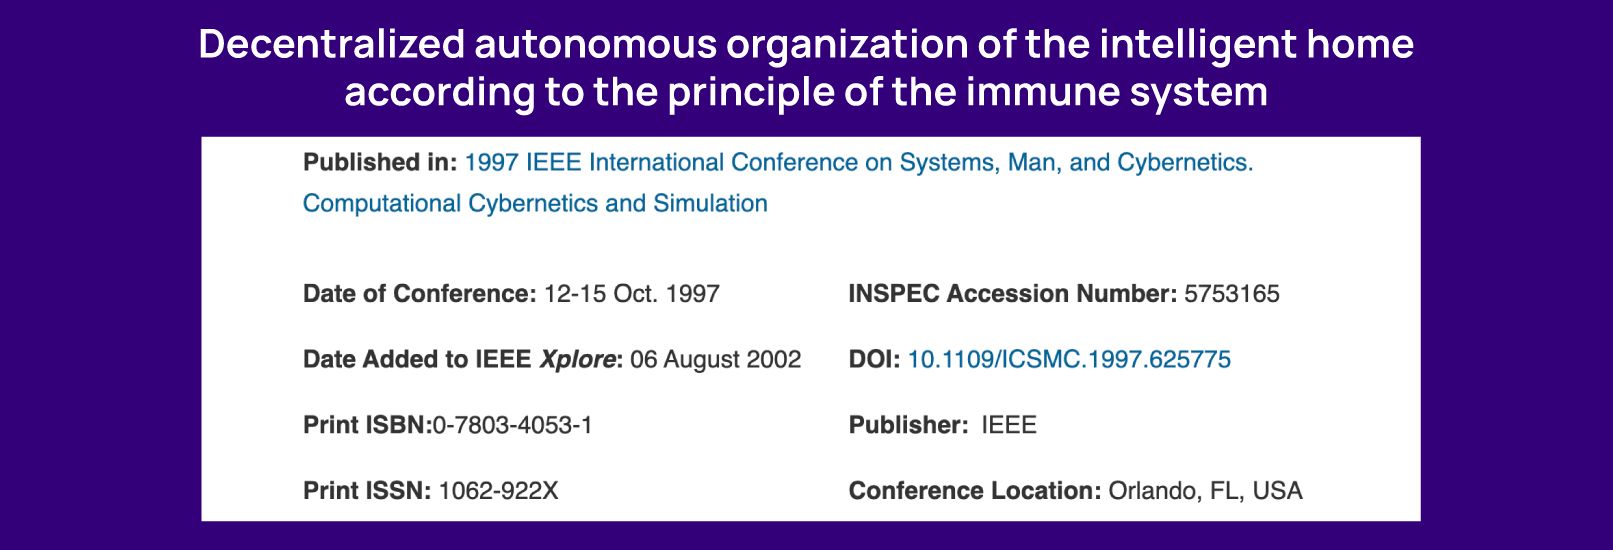 Decentralized autonomous organization of the intelligent home according to the principle of the immune system